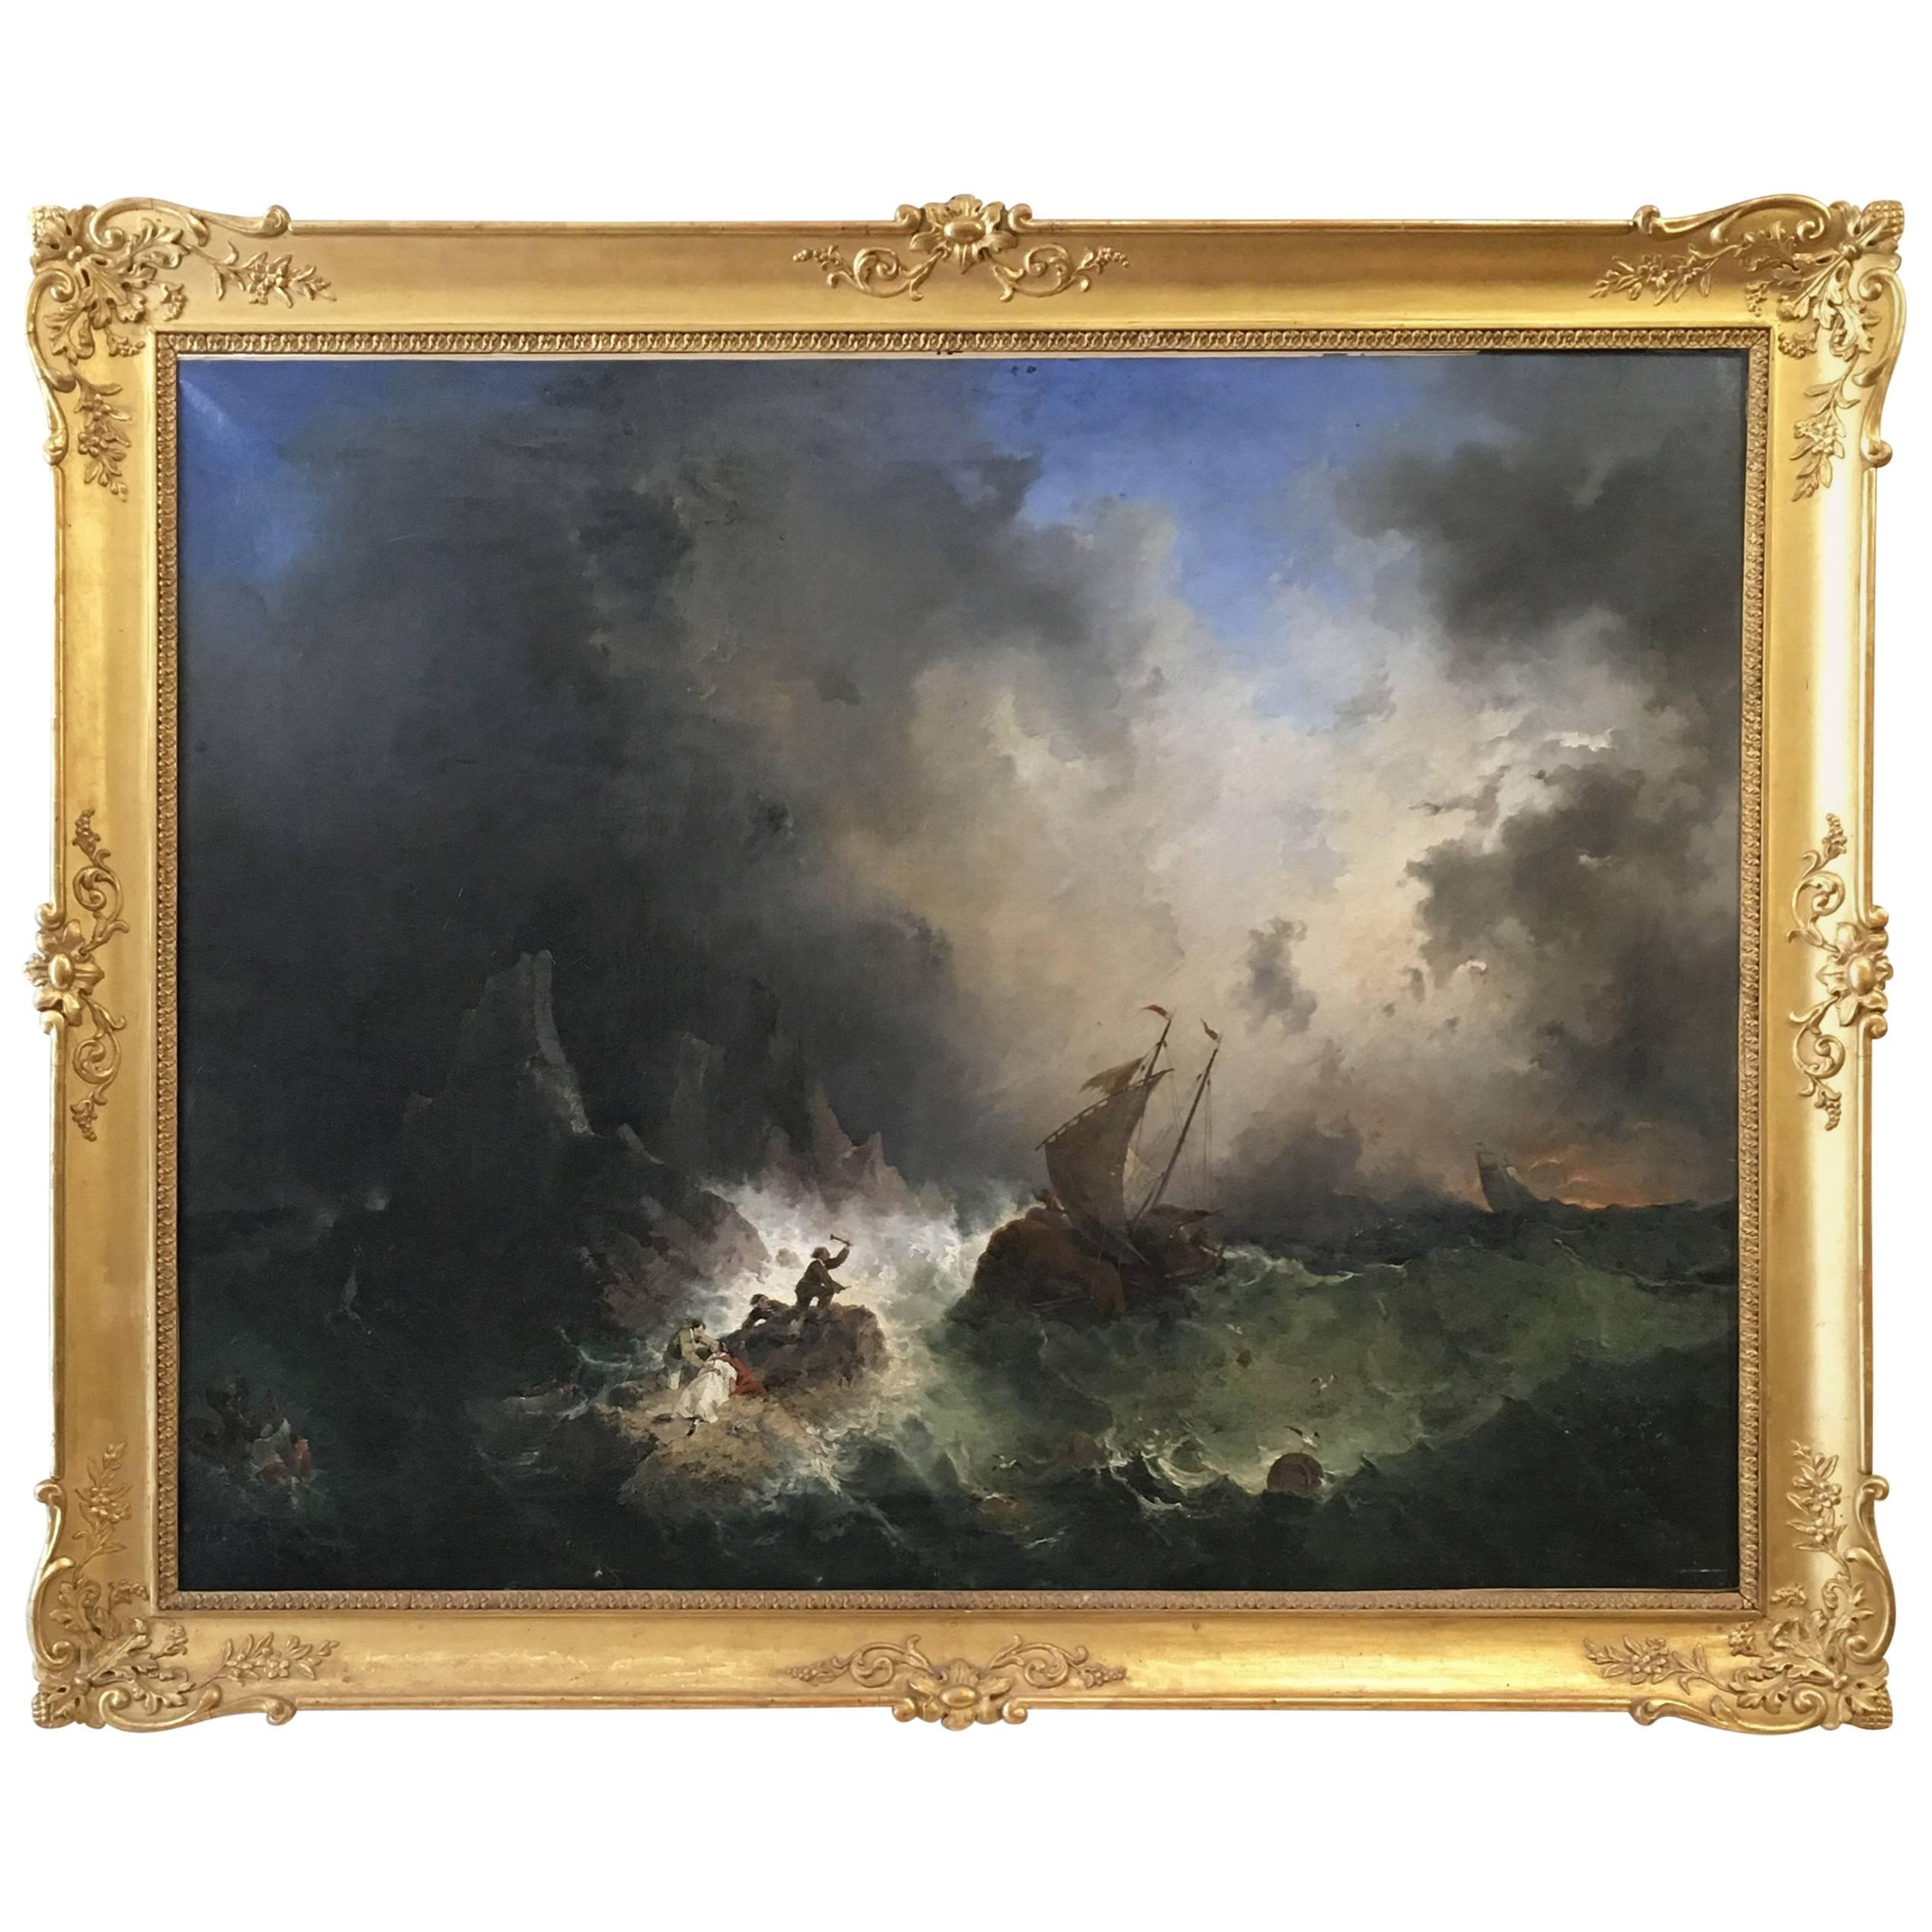 19th Century French Oil on Canvas Painting in Giltwood Frame Depicting Shipwreck